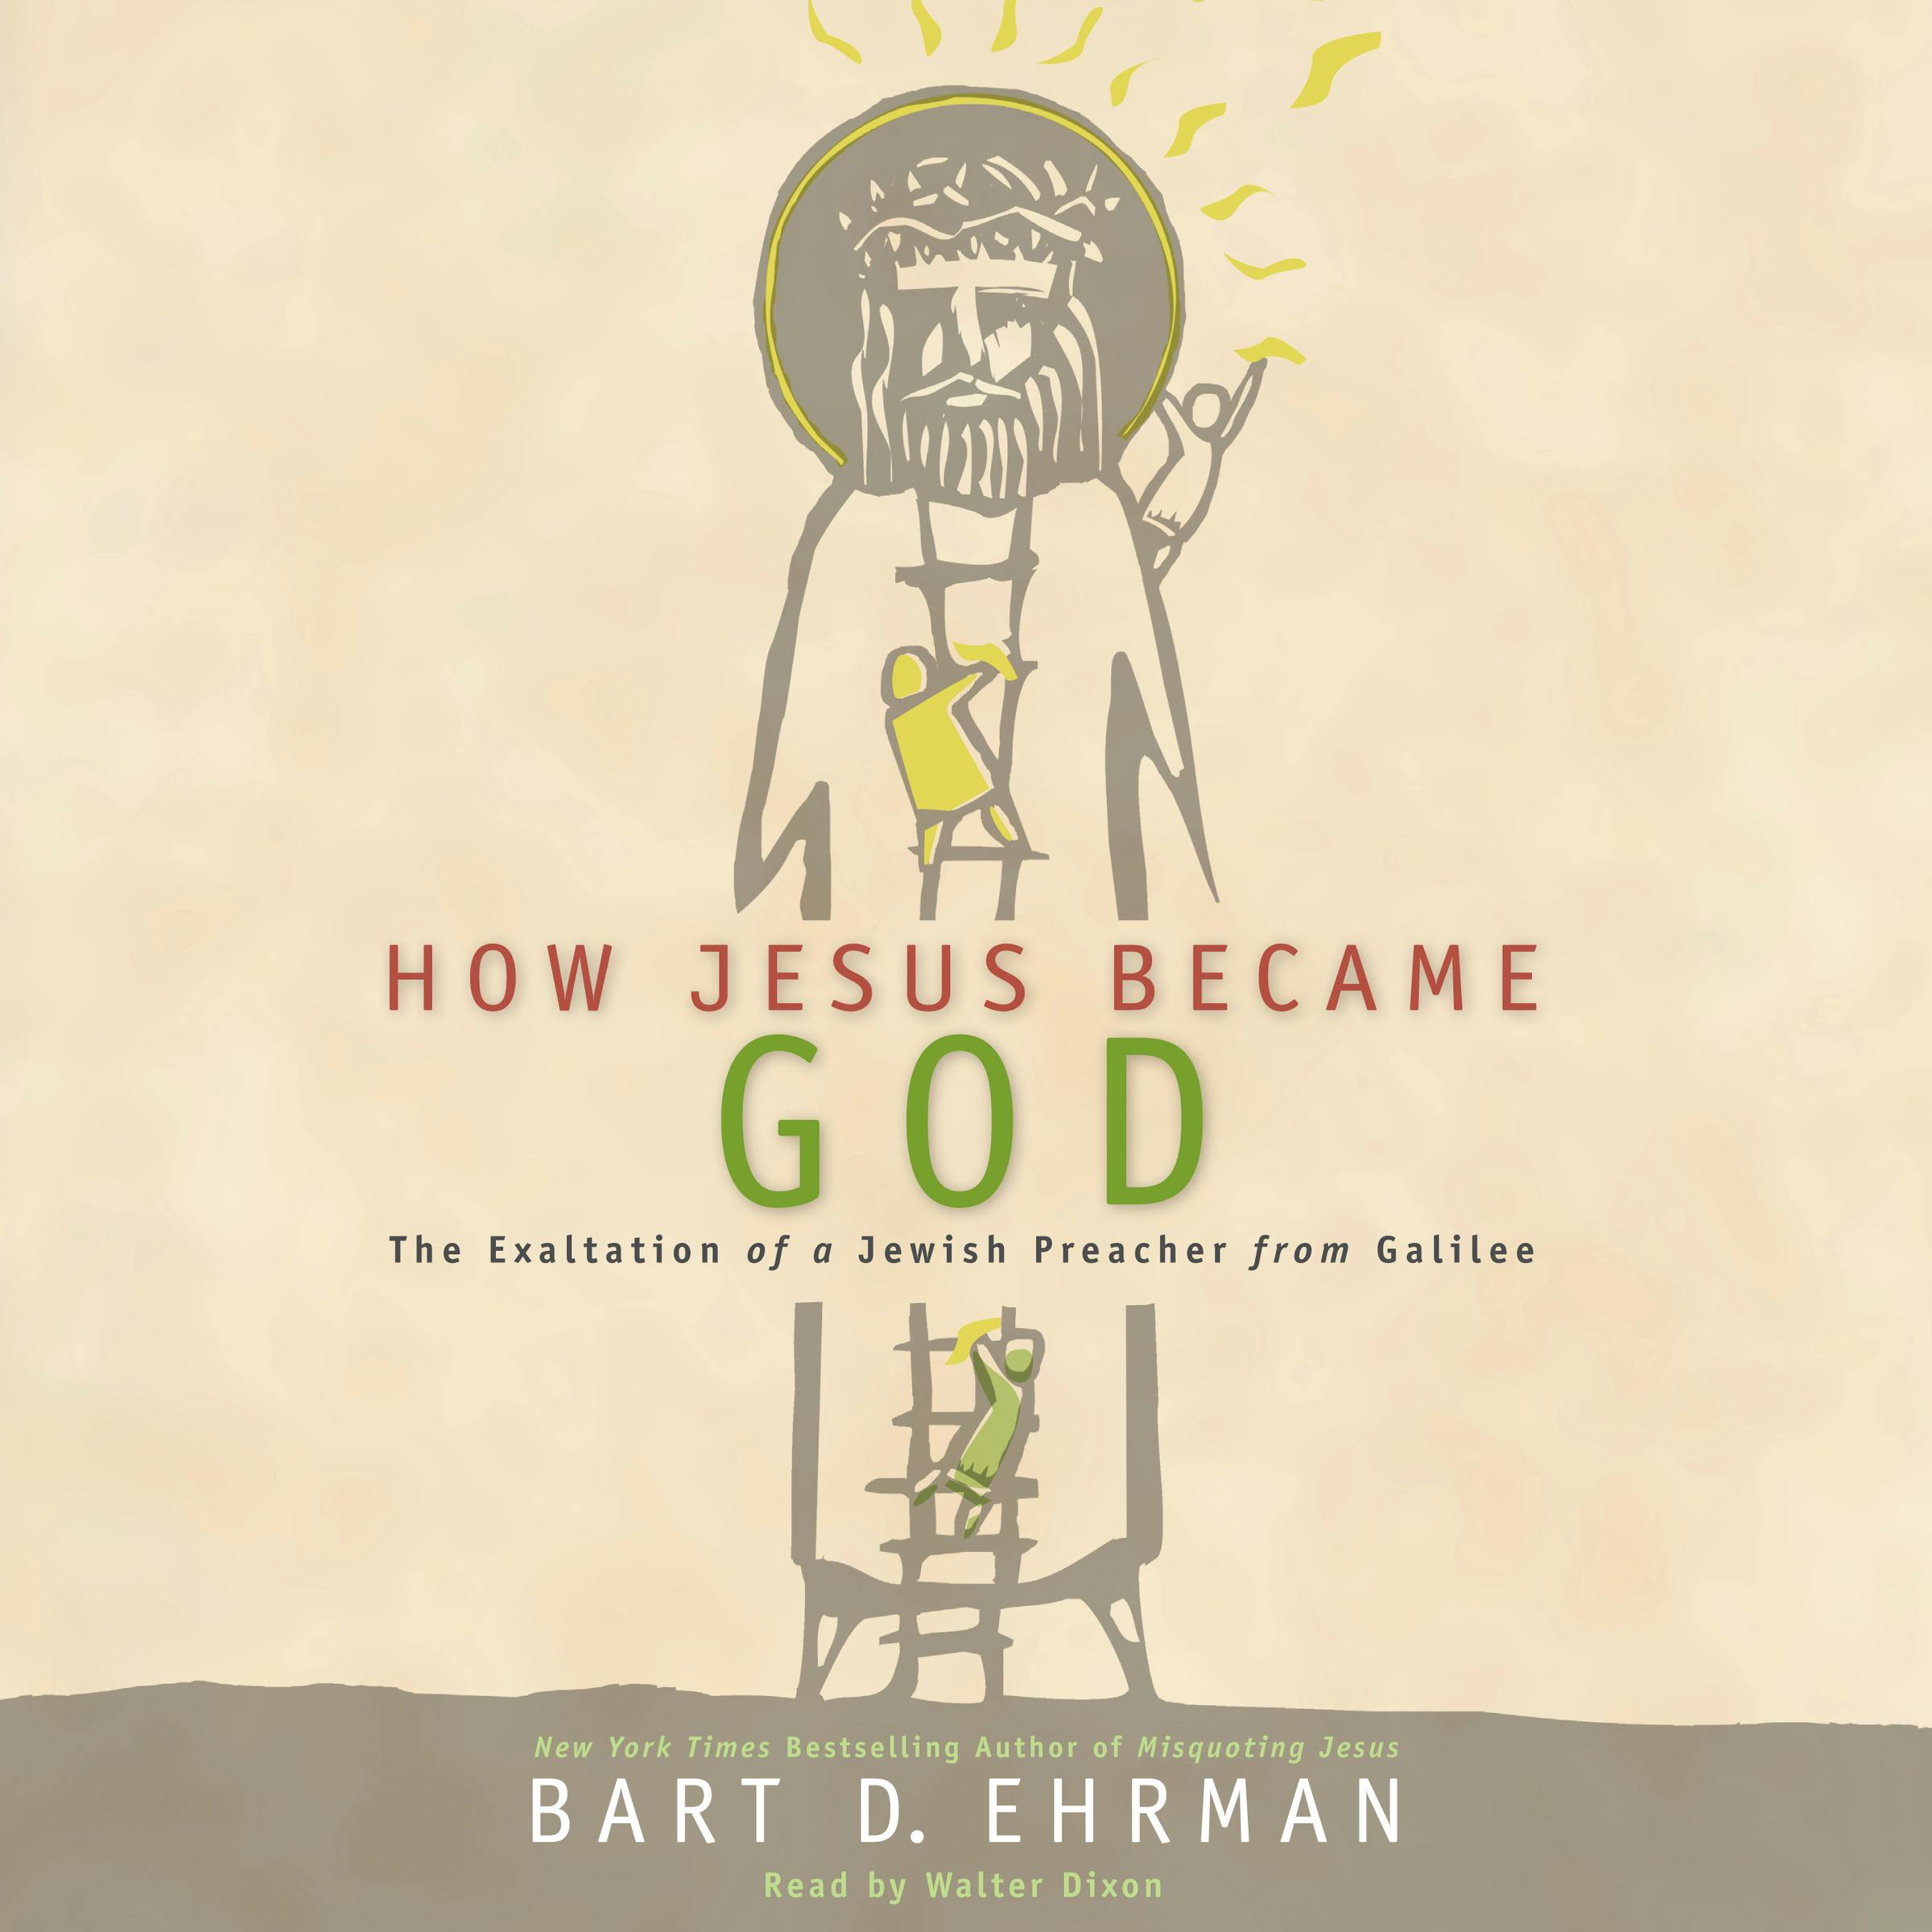 How Jesus Became God: The Exaltation of a Jewish Preacher from Galilee - Bart D. Ehrman